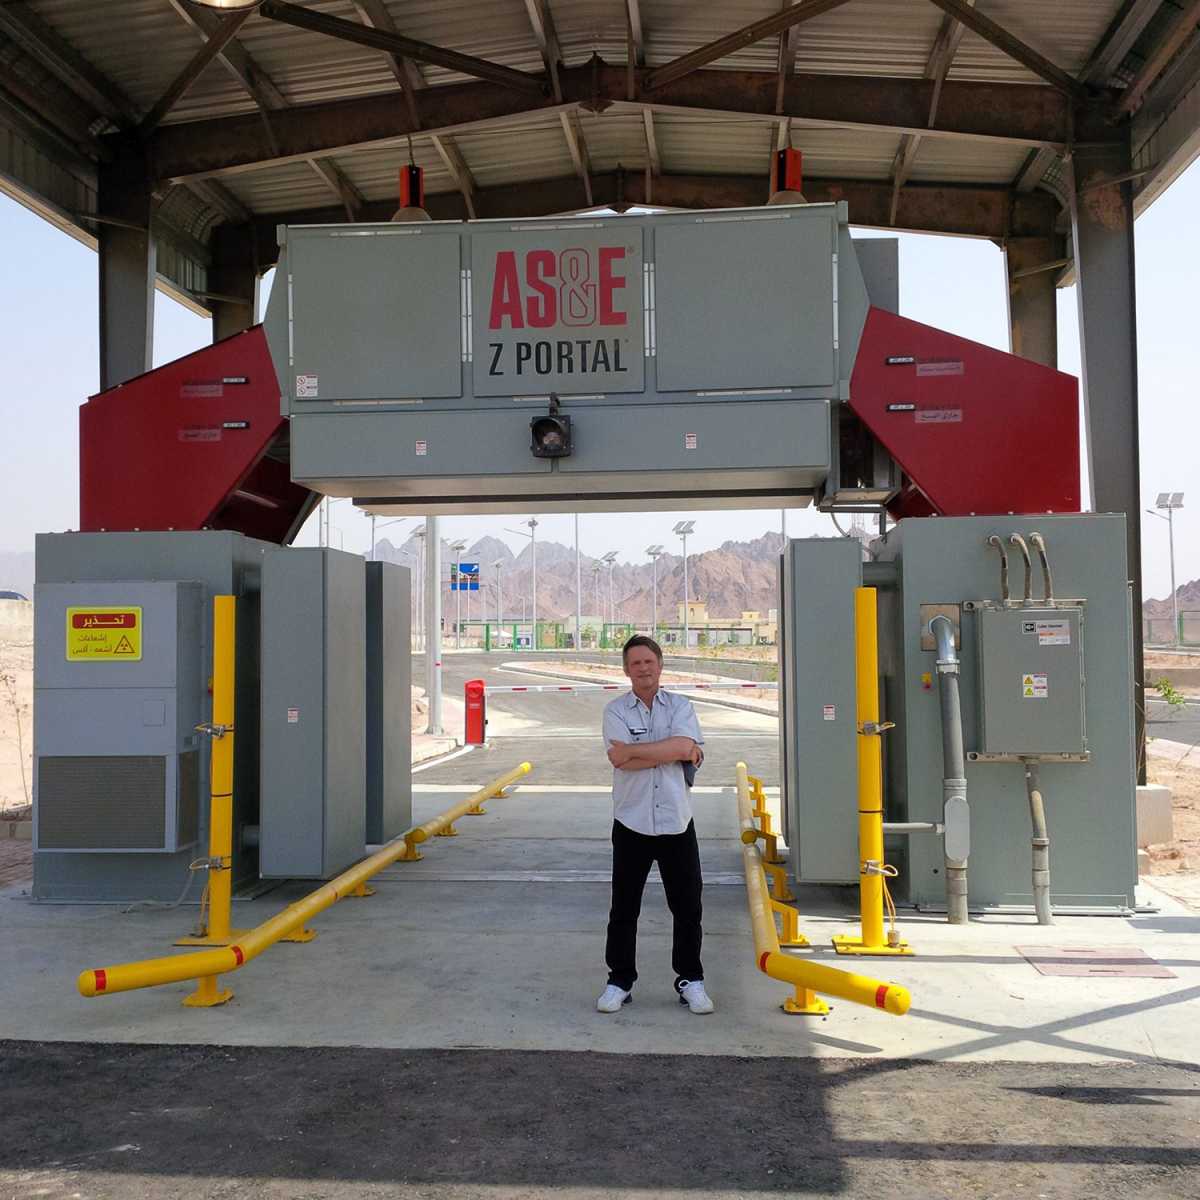 In a 2015 photo, then-Assistant Secretary of State for International Security and Nonproliferation Thomas Countryman poses at the entry checkpoint to Sharm el-Sheikh, Egypt, where the U.S. government assisted in funding a vehicle and cargo x-ray scanner. Credit: U.S. Department of State